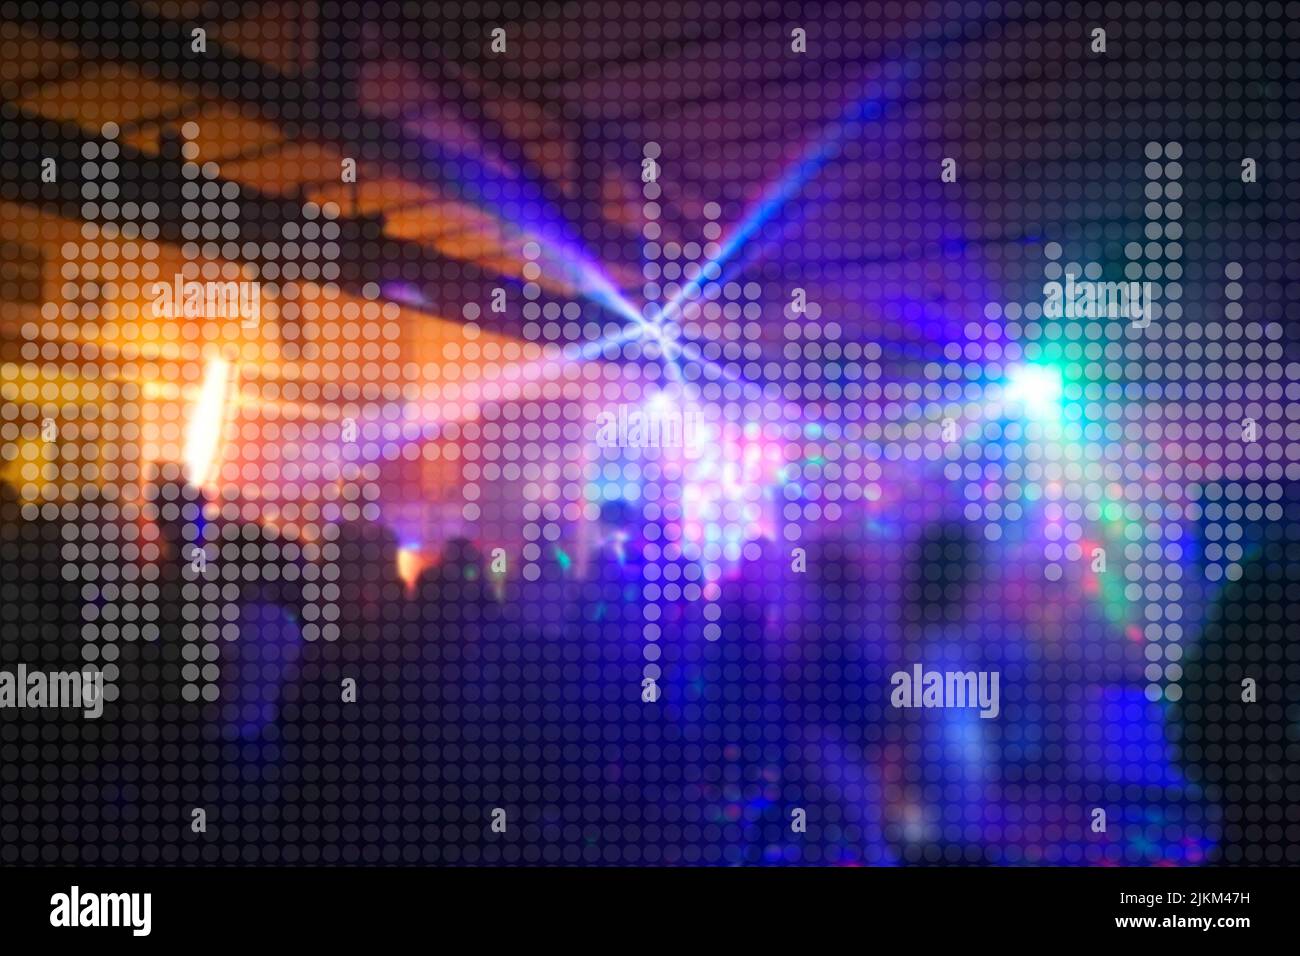 blurry scene from a music club with lighting effects with overlay dotted audio equalizer Halftone effect pattern to promote events Stock Photo